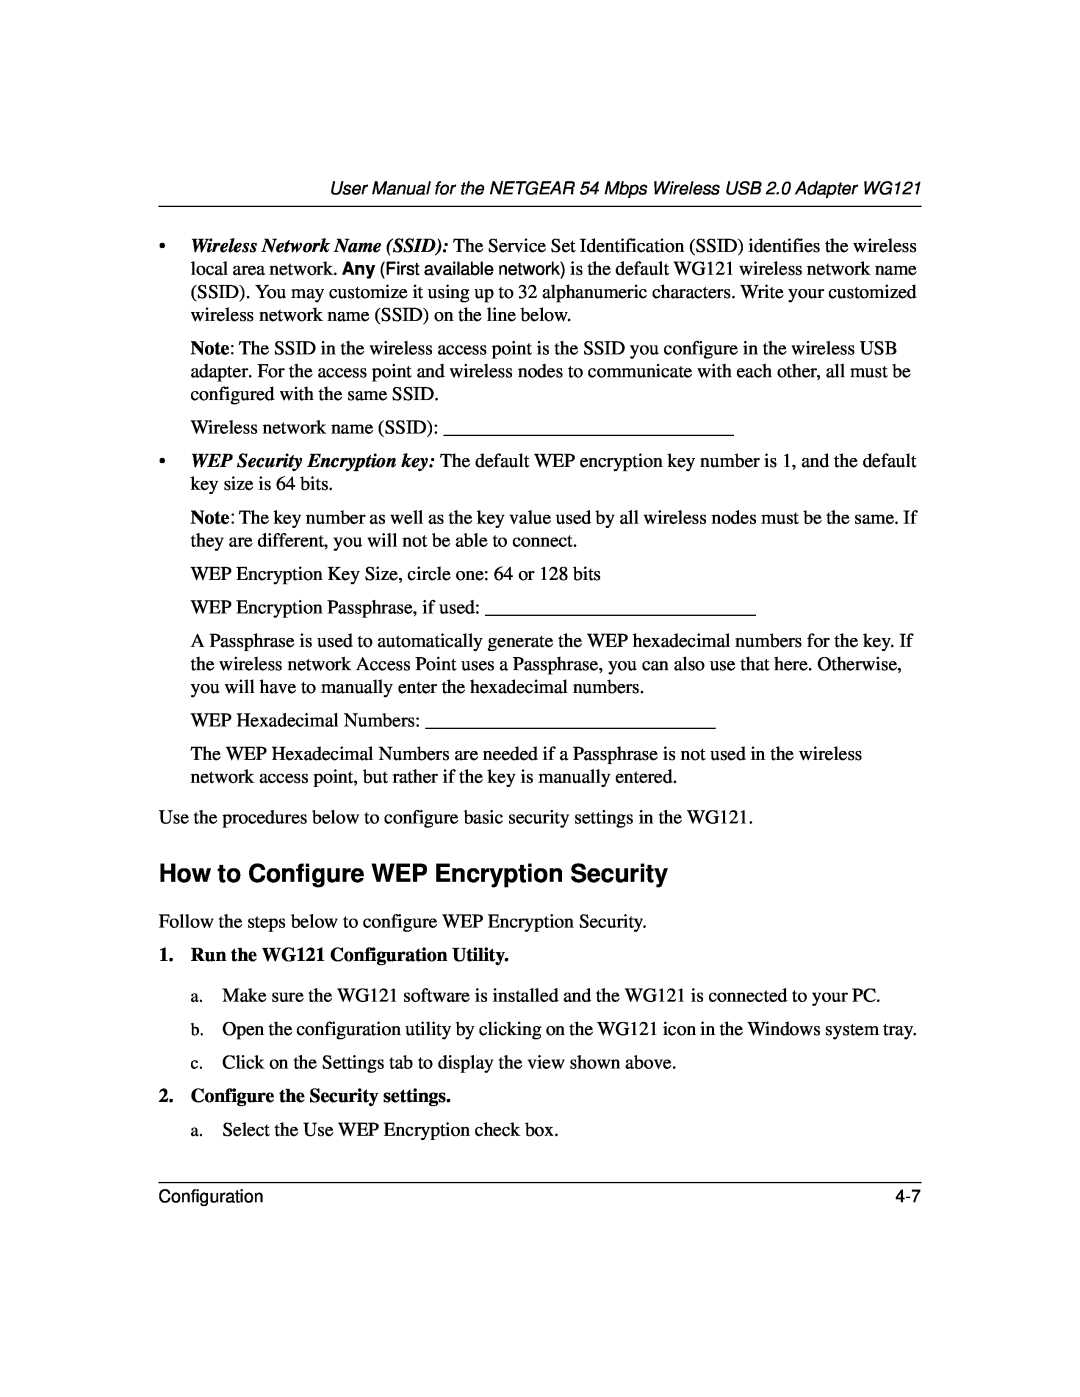 NETGEAR How to Configure WEP Encryption Security, Run the WG121 Configuration Utility, Configure the Security settings 